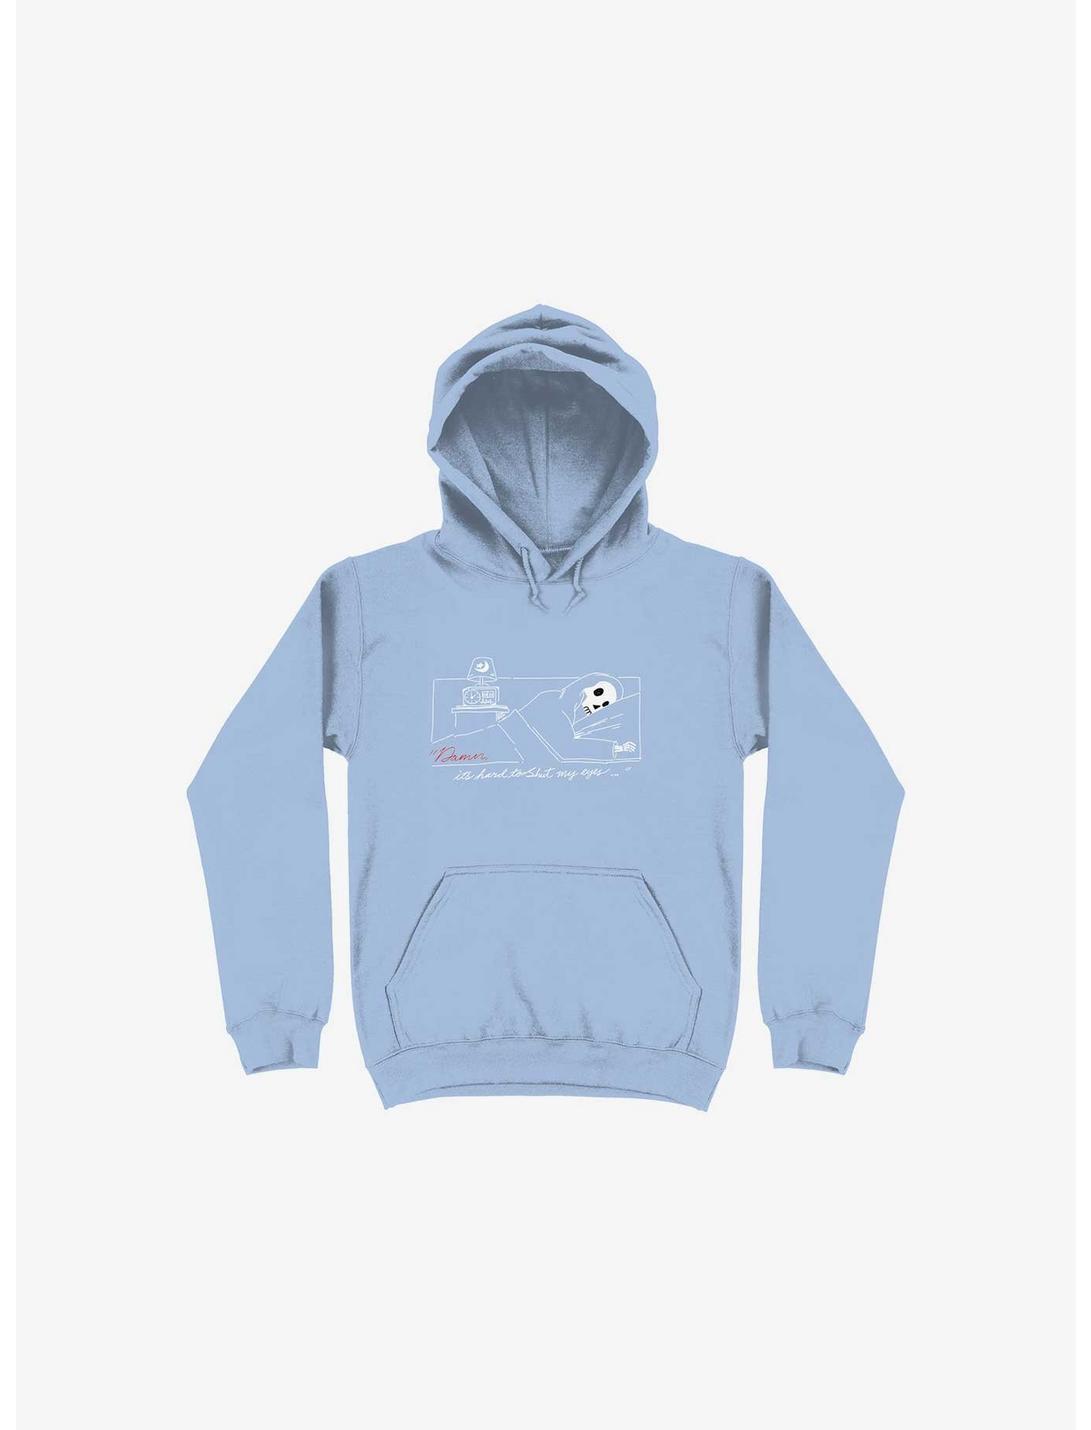 Damn, Sleepy Time Is Out Hoodie, LIGHT BLUE, hi-res